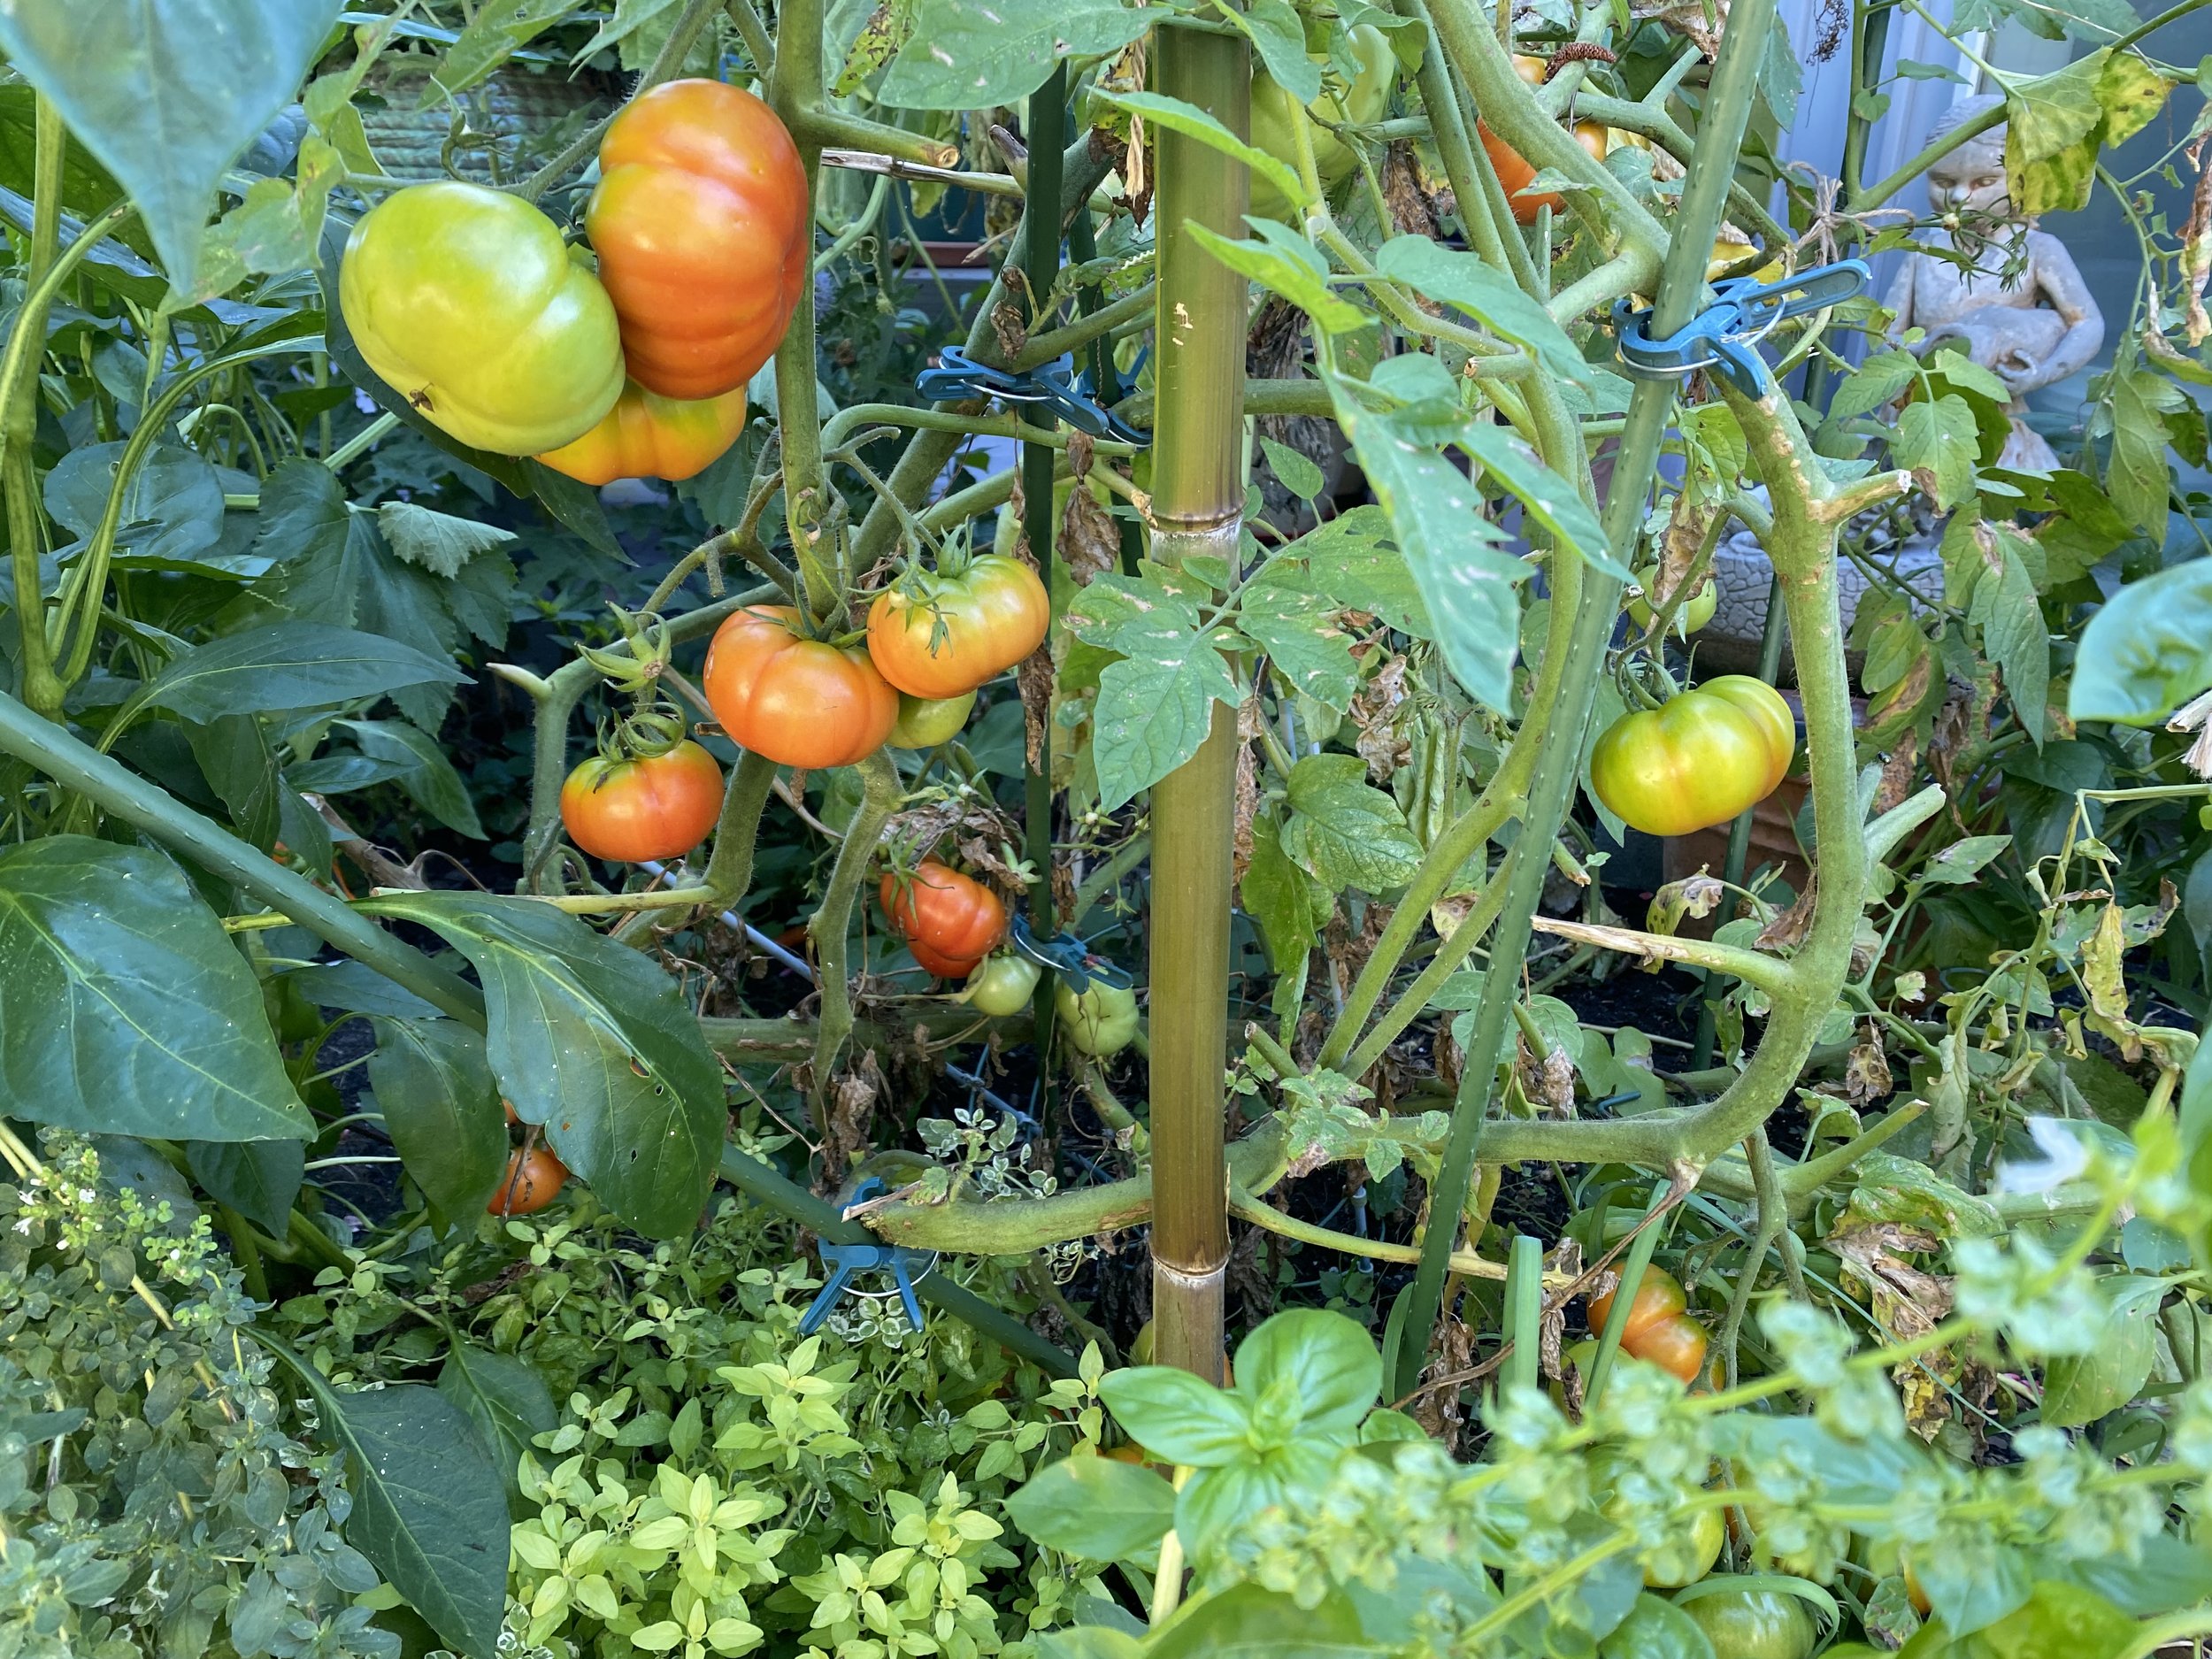 tomatoes in the garden.jpeg